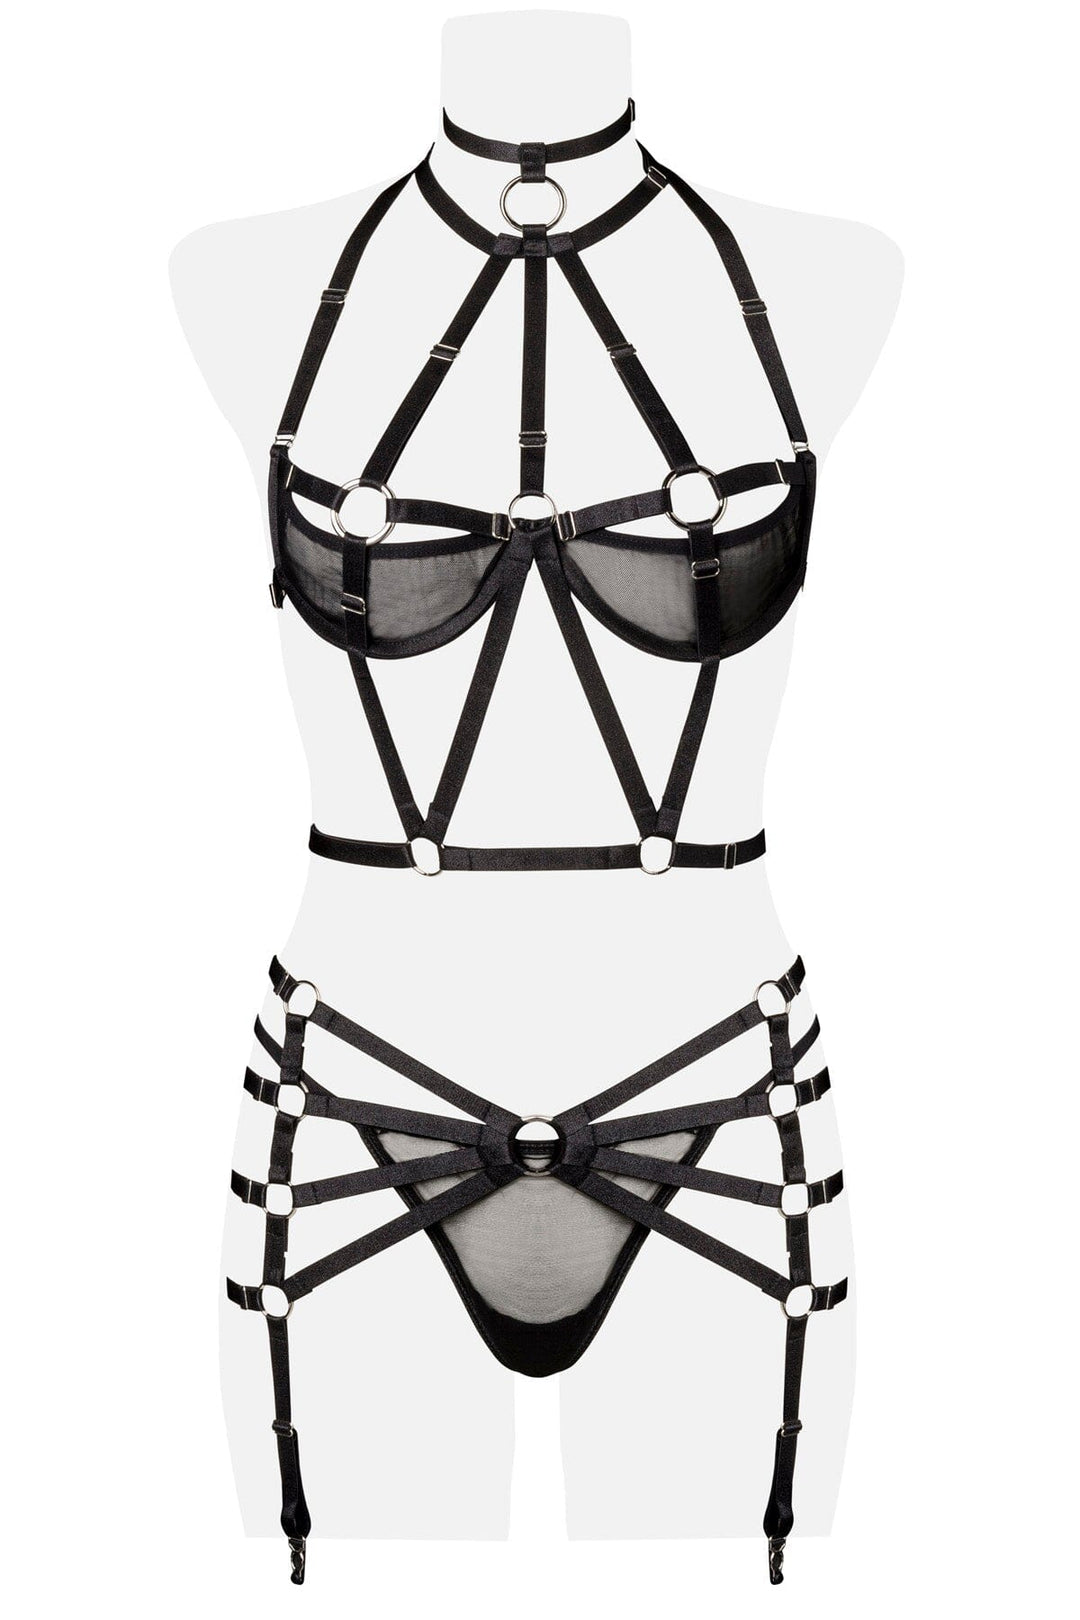 3 Piece Caged Harness Set-Body Harness-Grey Velvet-SEXYSHOES.COM